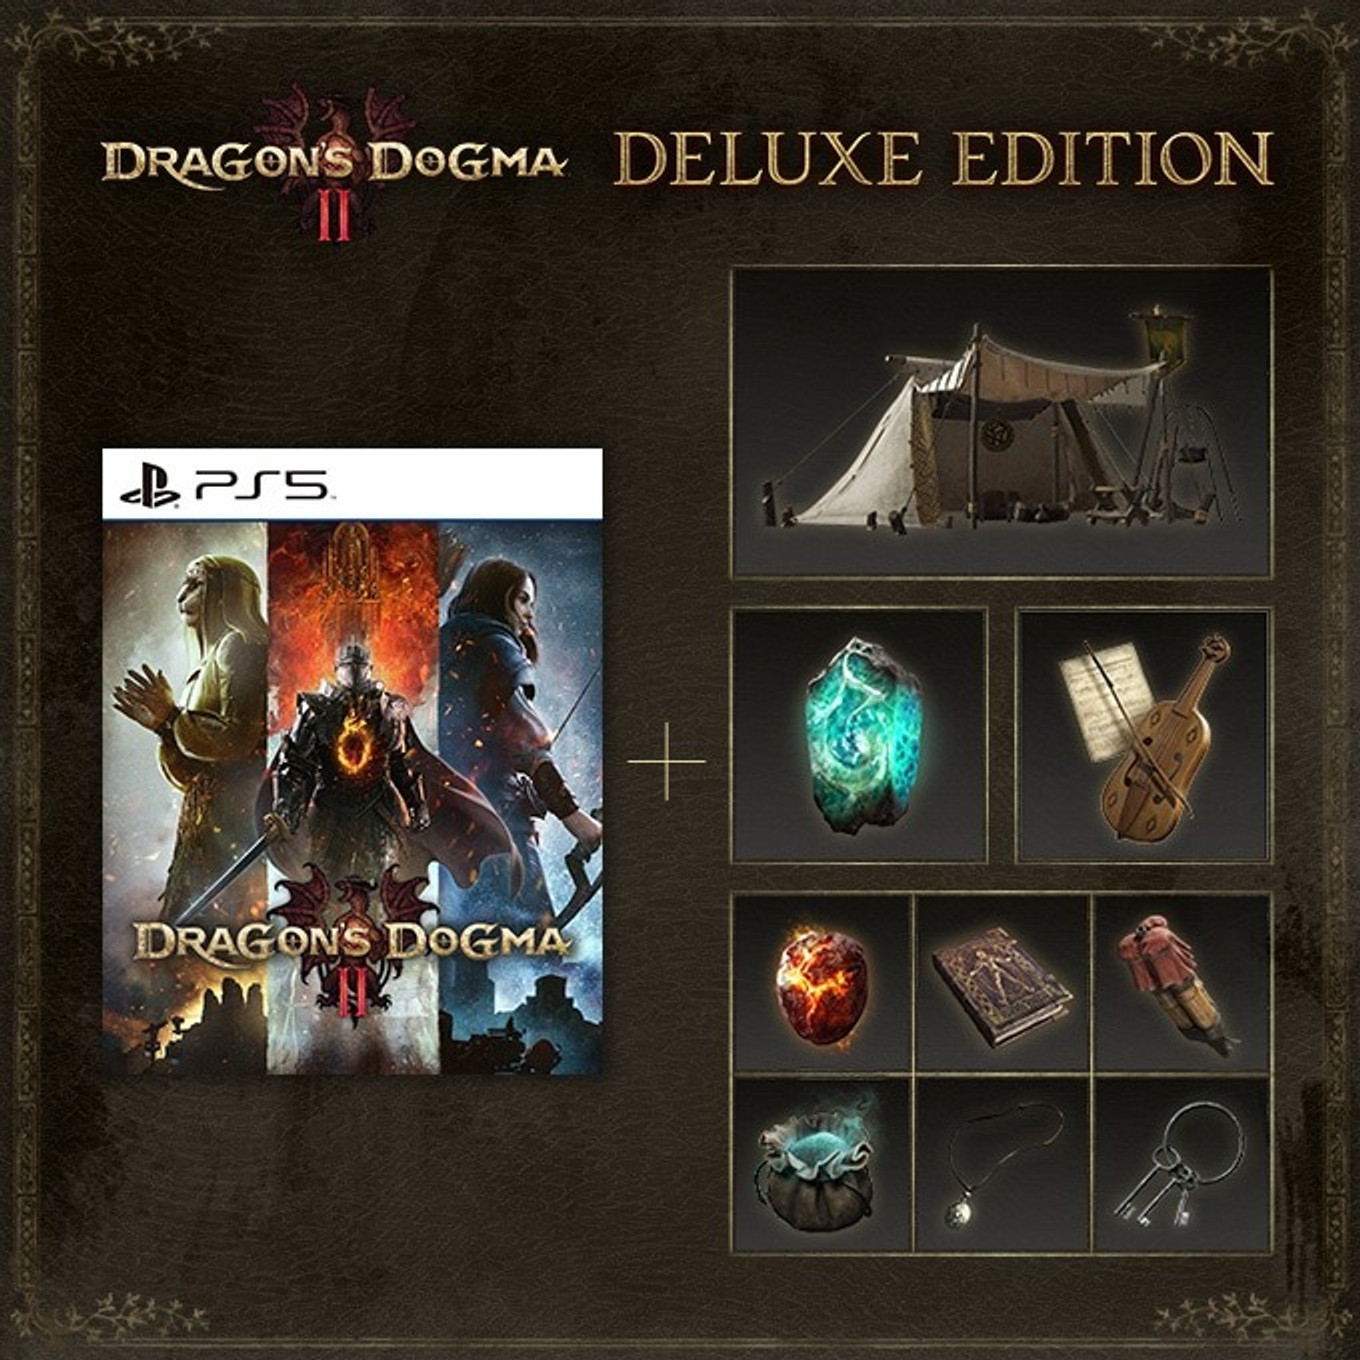 edition-deluxe-dd2